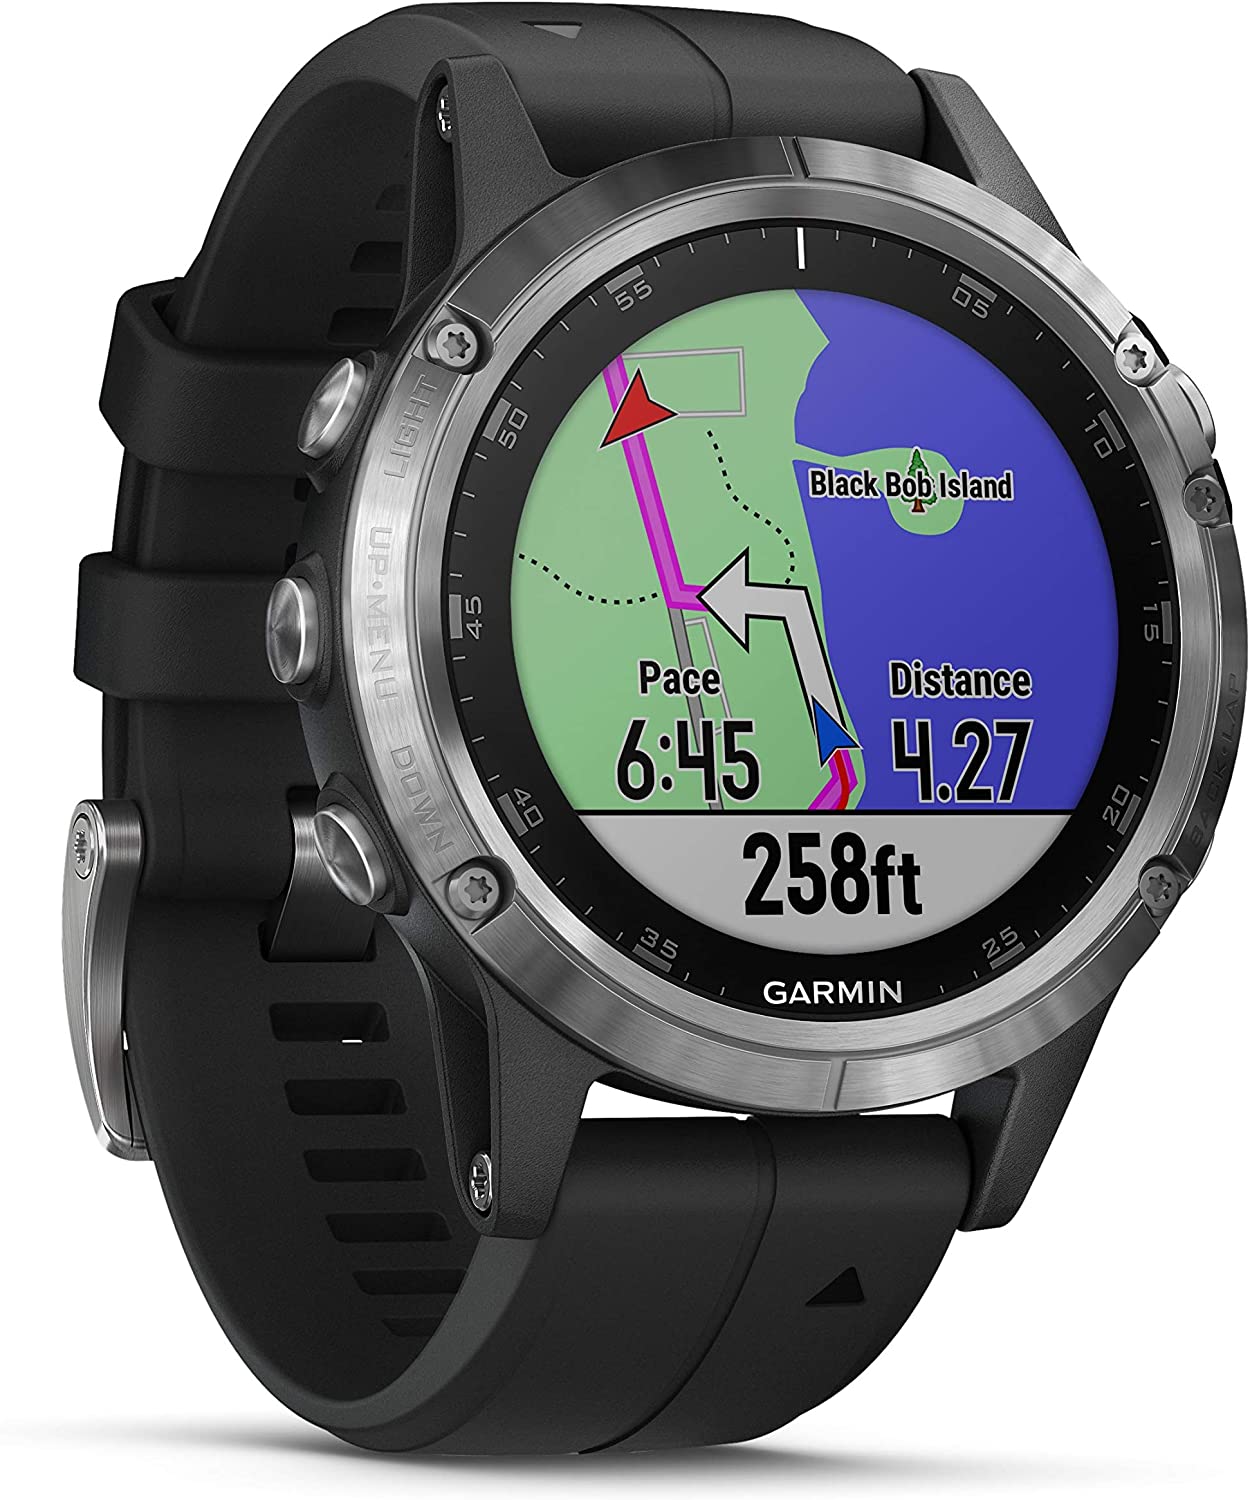 garmin fenix 5 plus multisport watch with music, maps and garmin pay, silver with black band - a photo